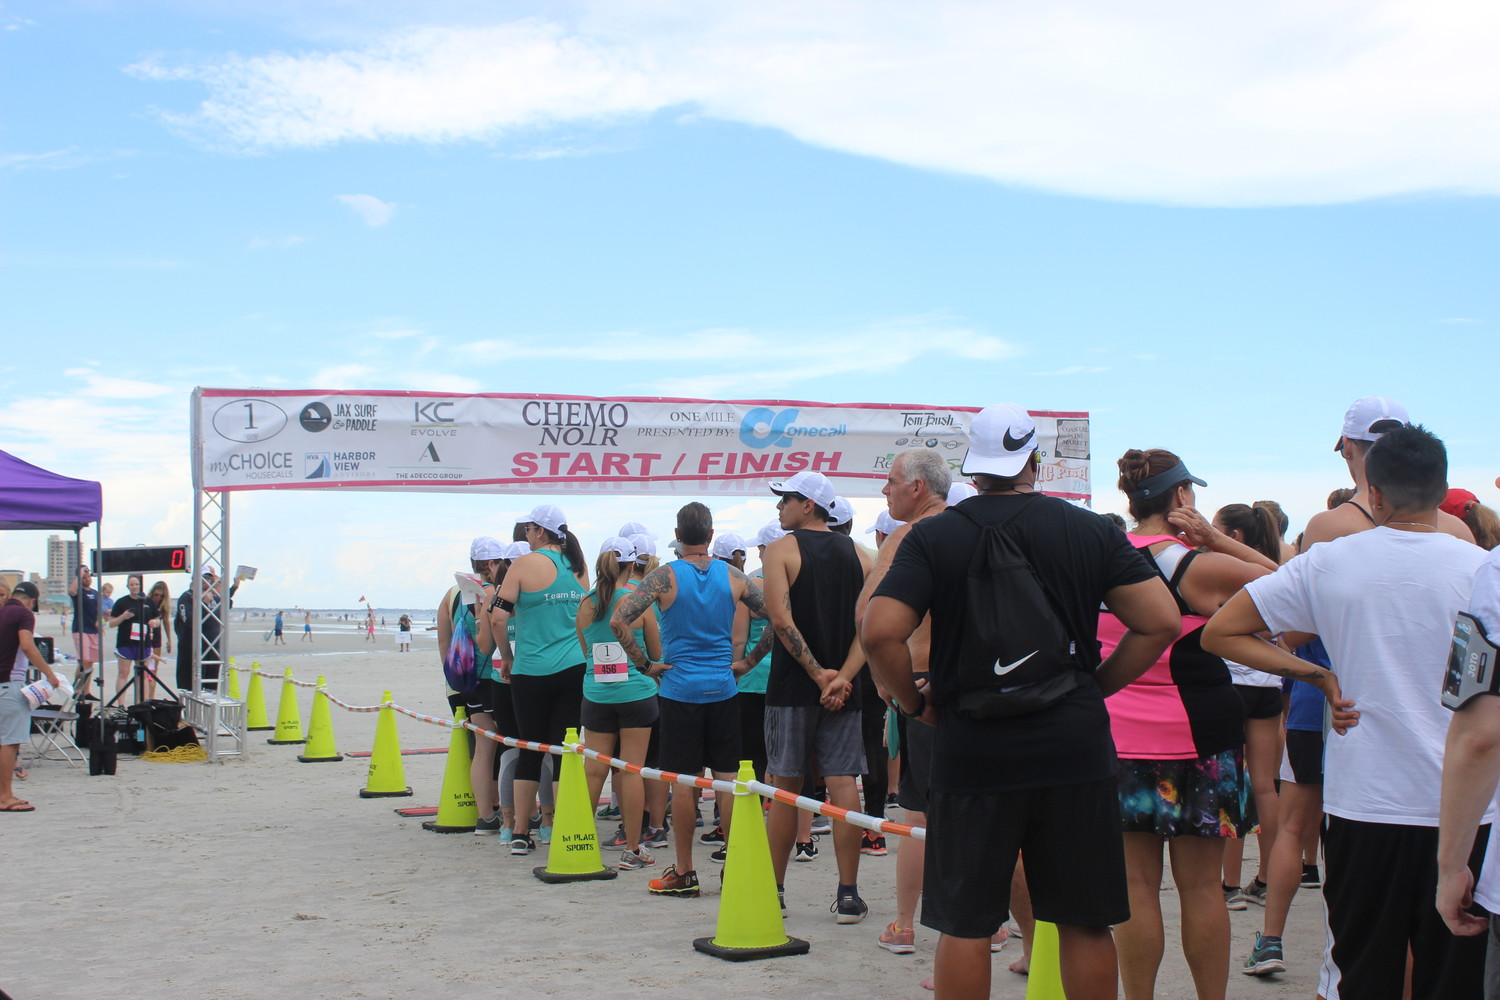 Participants of the Chemo Noir race June 16 in Jacksonville Beach gather at the starting line.